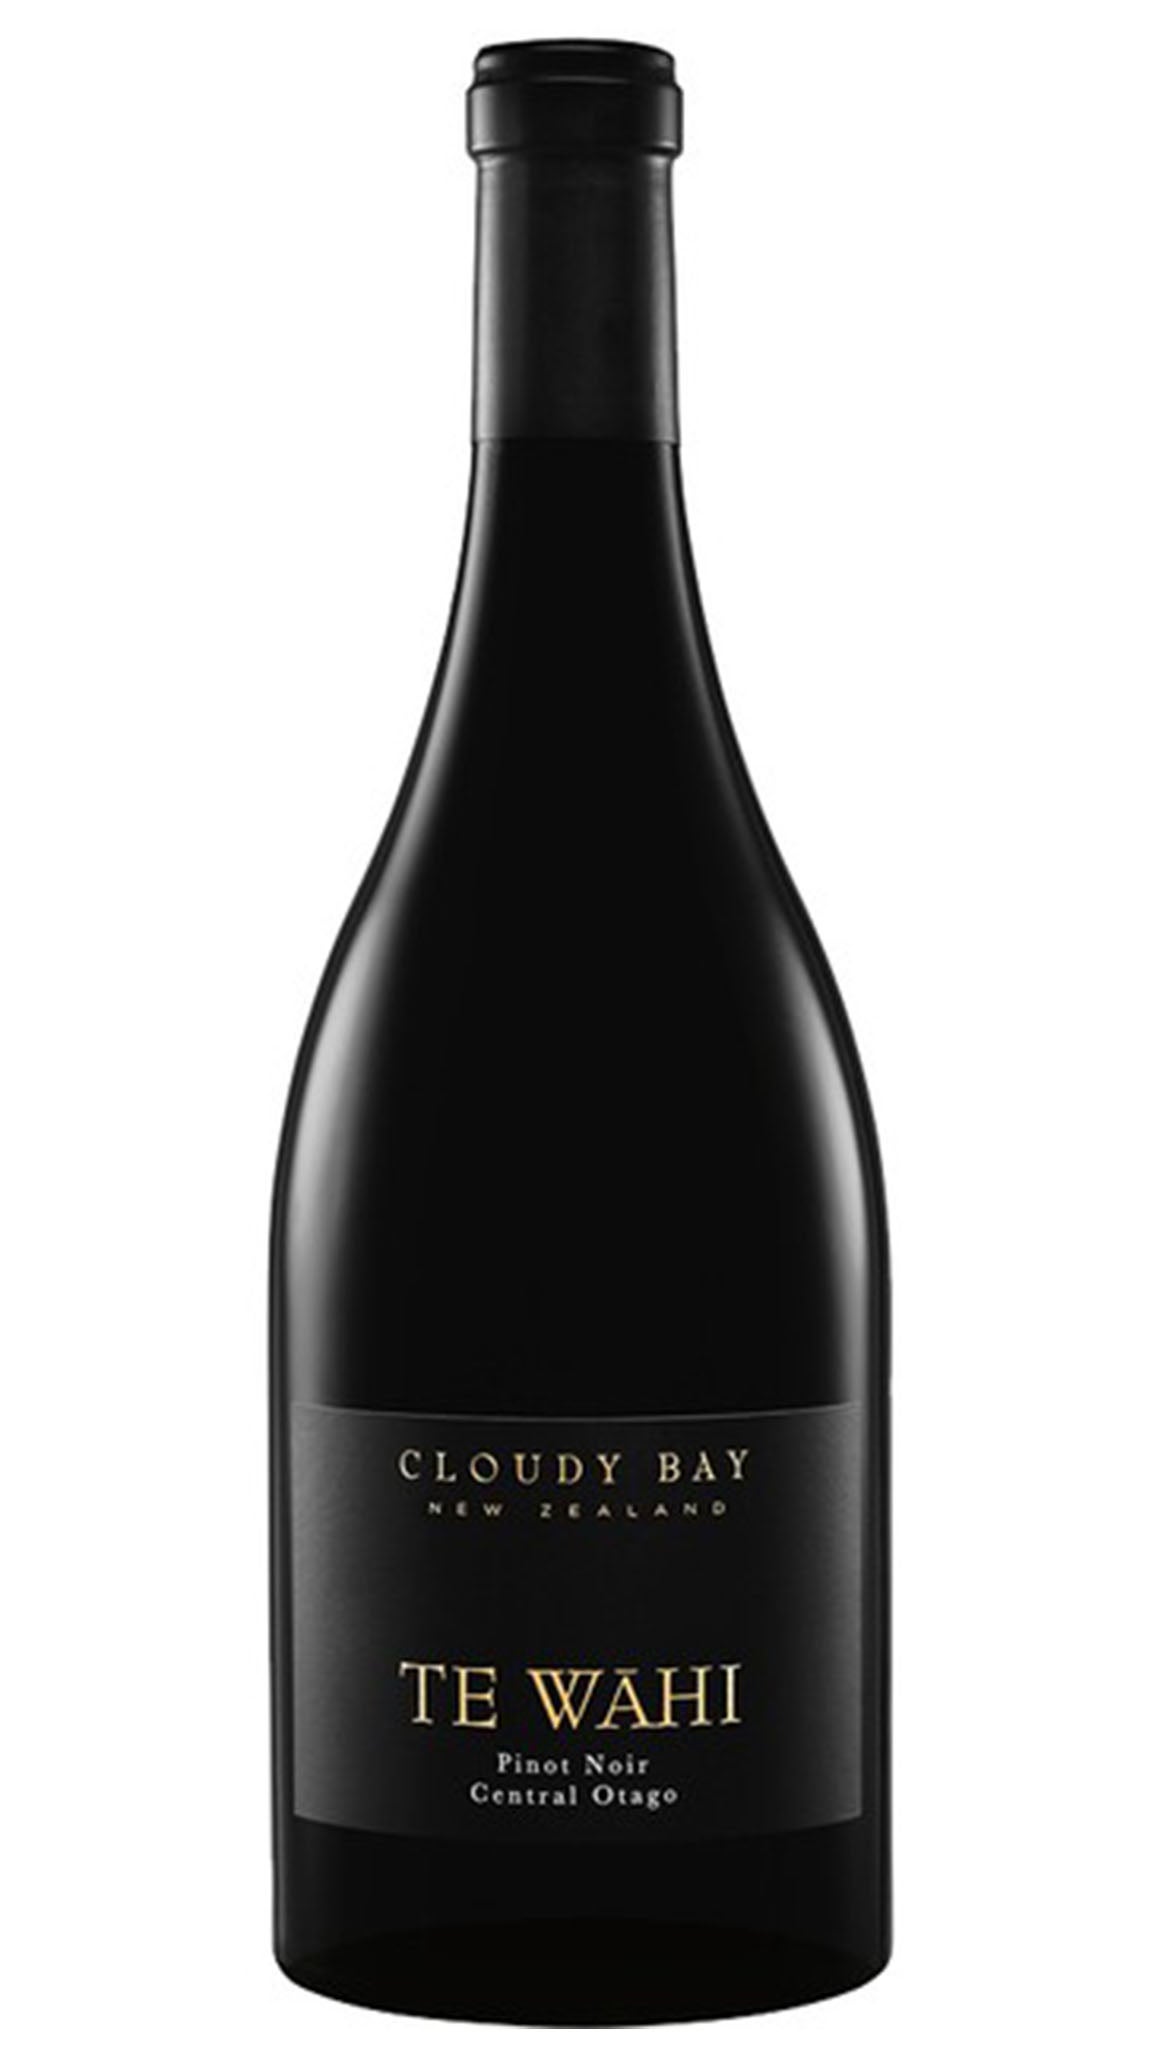 Pinot Delivery Wahi Fine Noir Bay 2018 Cloudy Wine - Te